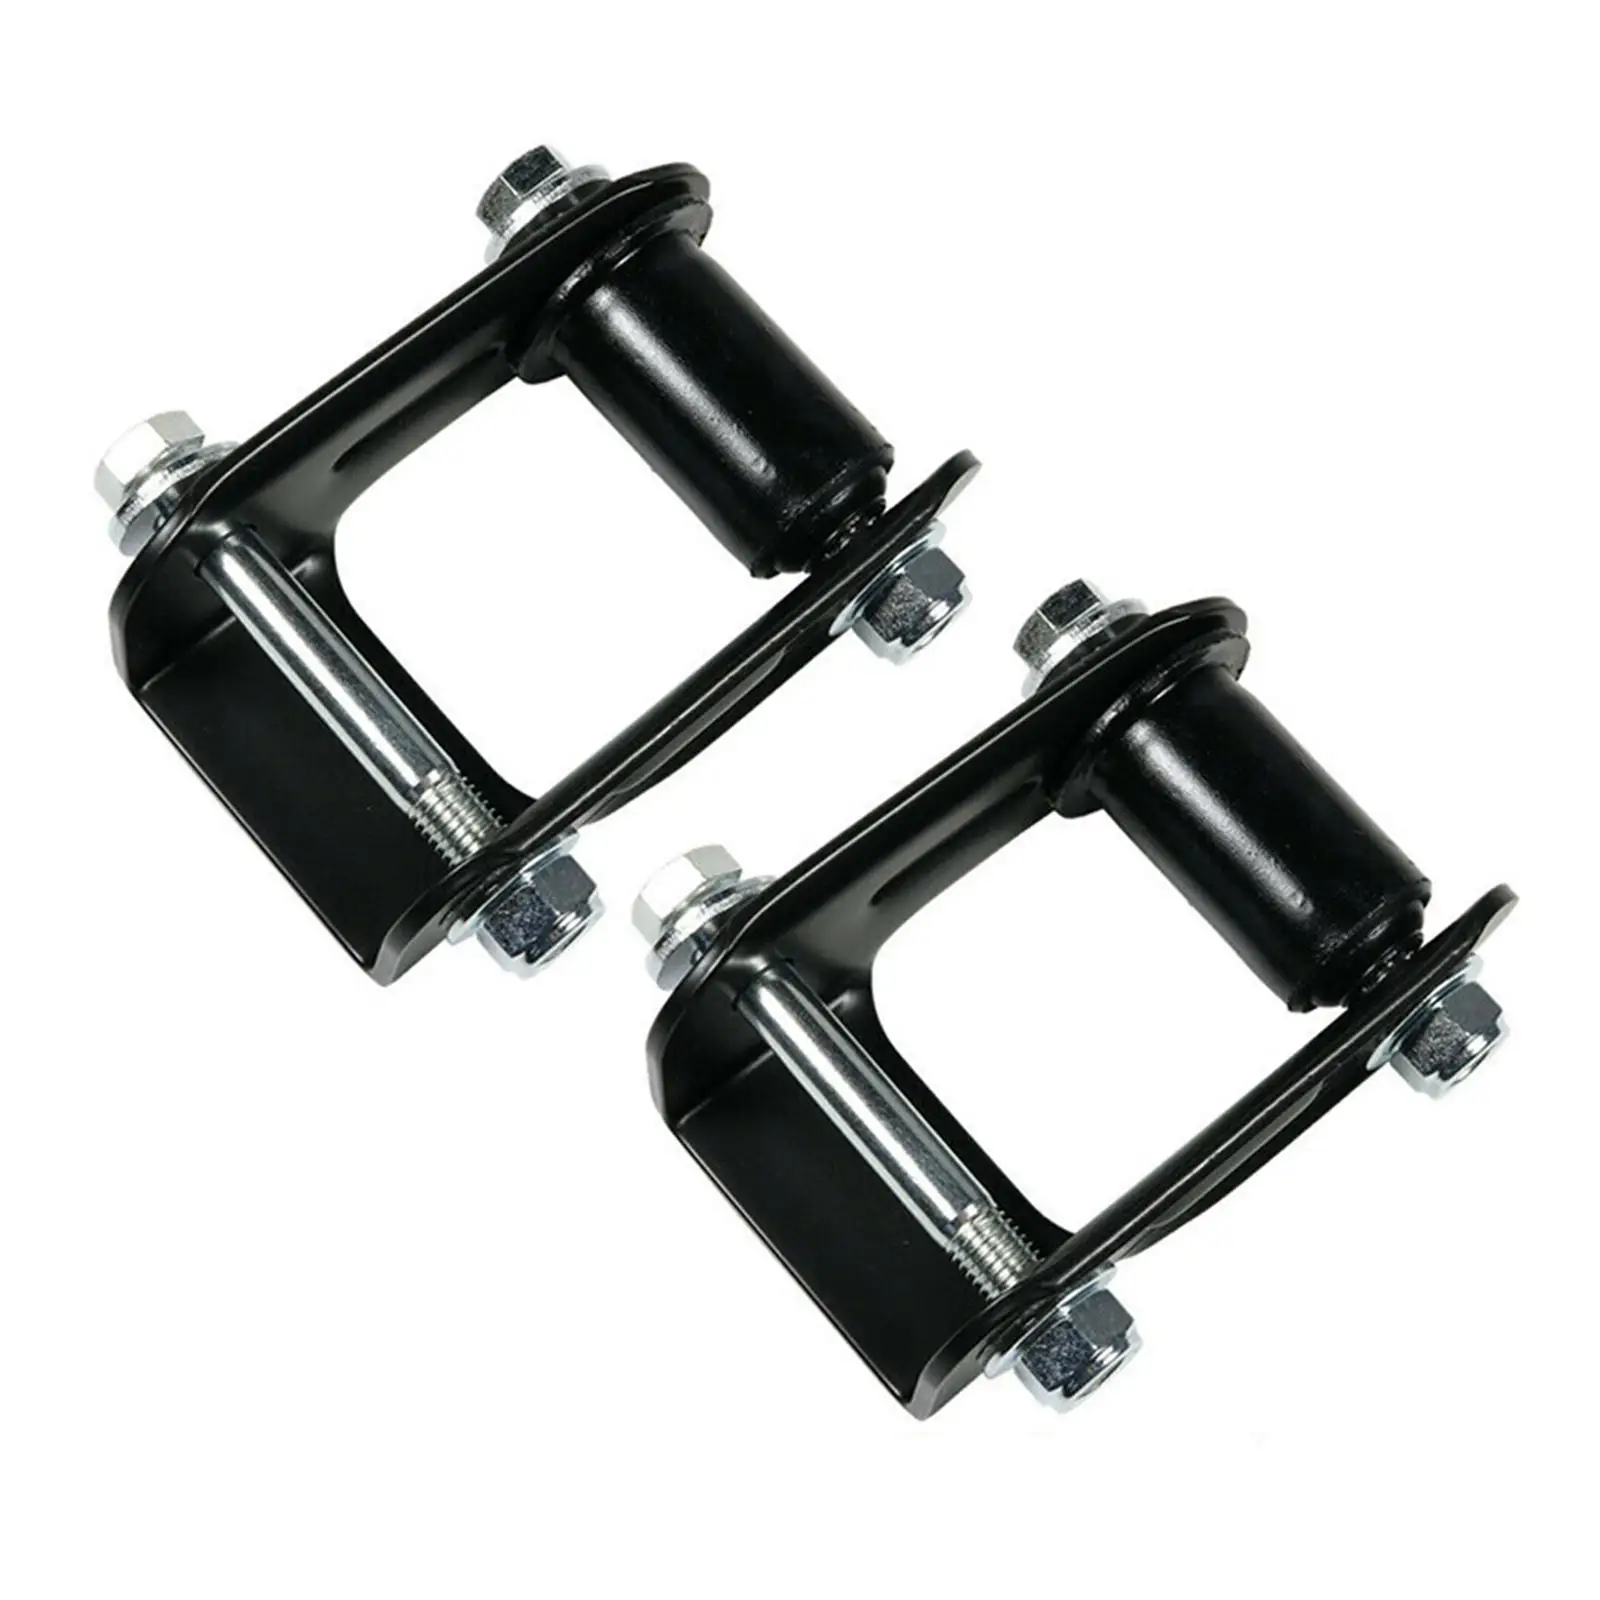 2 Pieces Leaf Spring Shackle Kit Decorative Accessories for Chevrolet